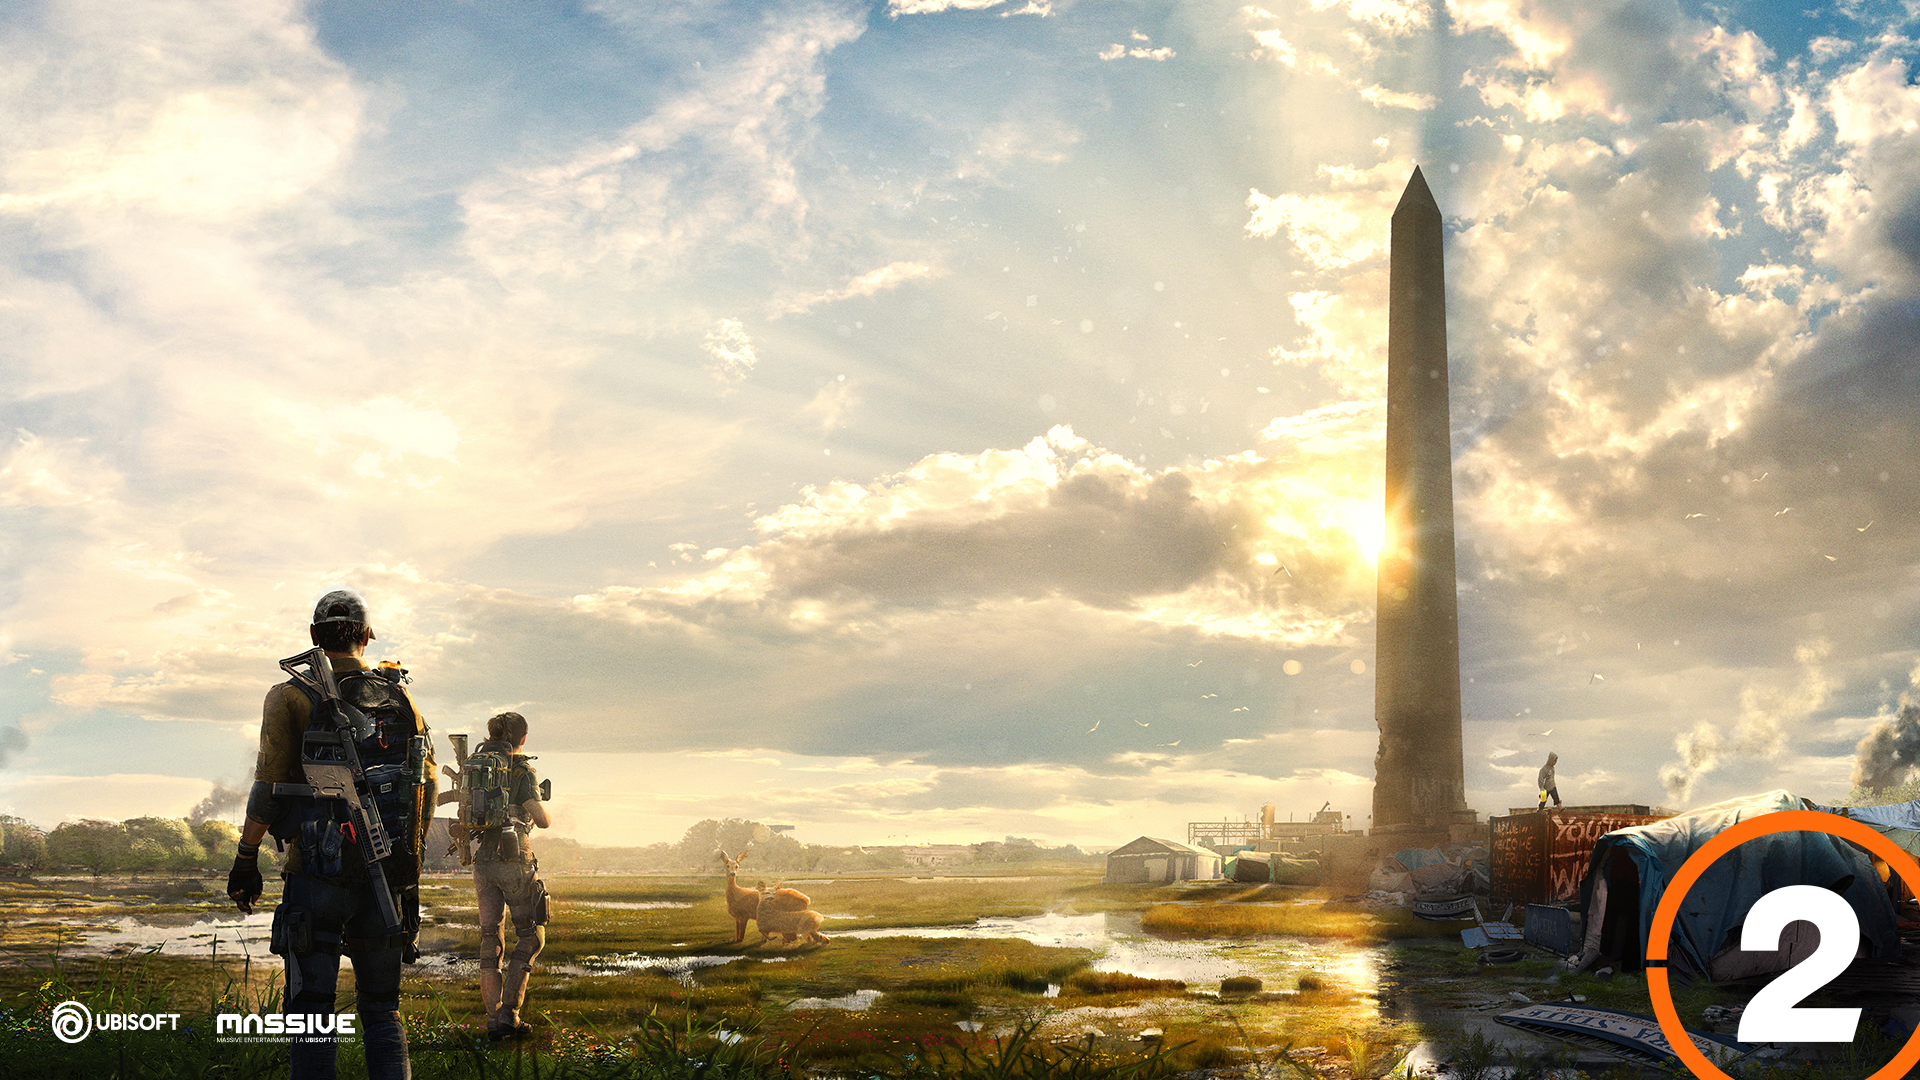 thedivision2 concept2 1920